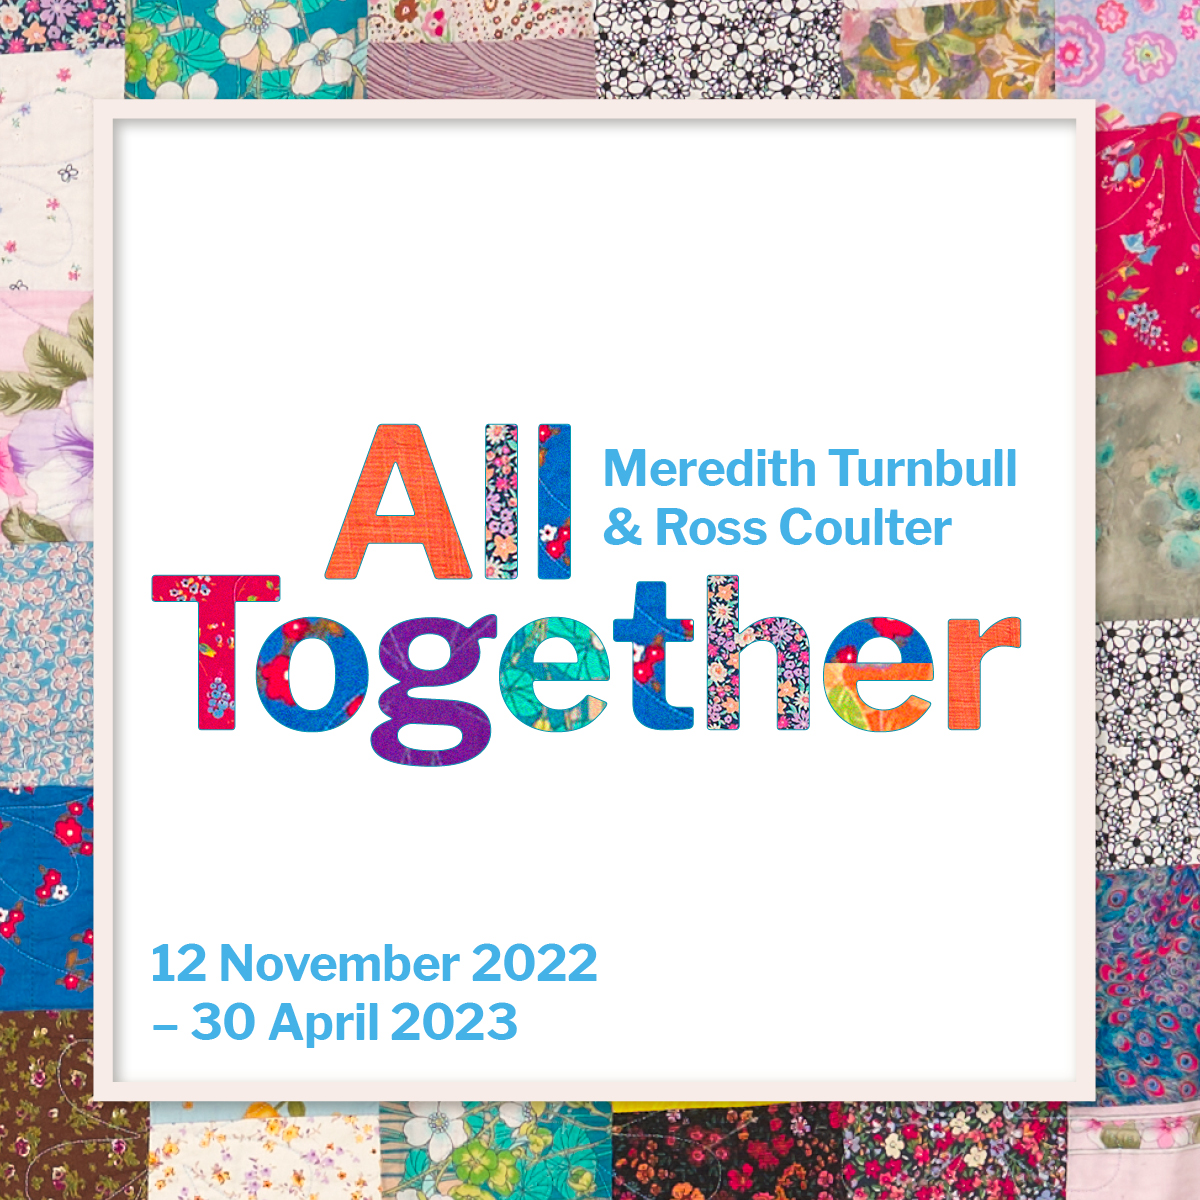 All Together exhibition treatment